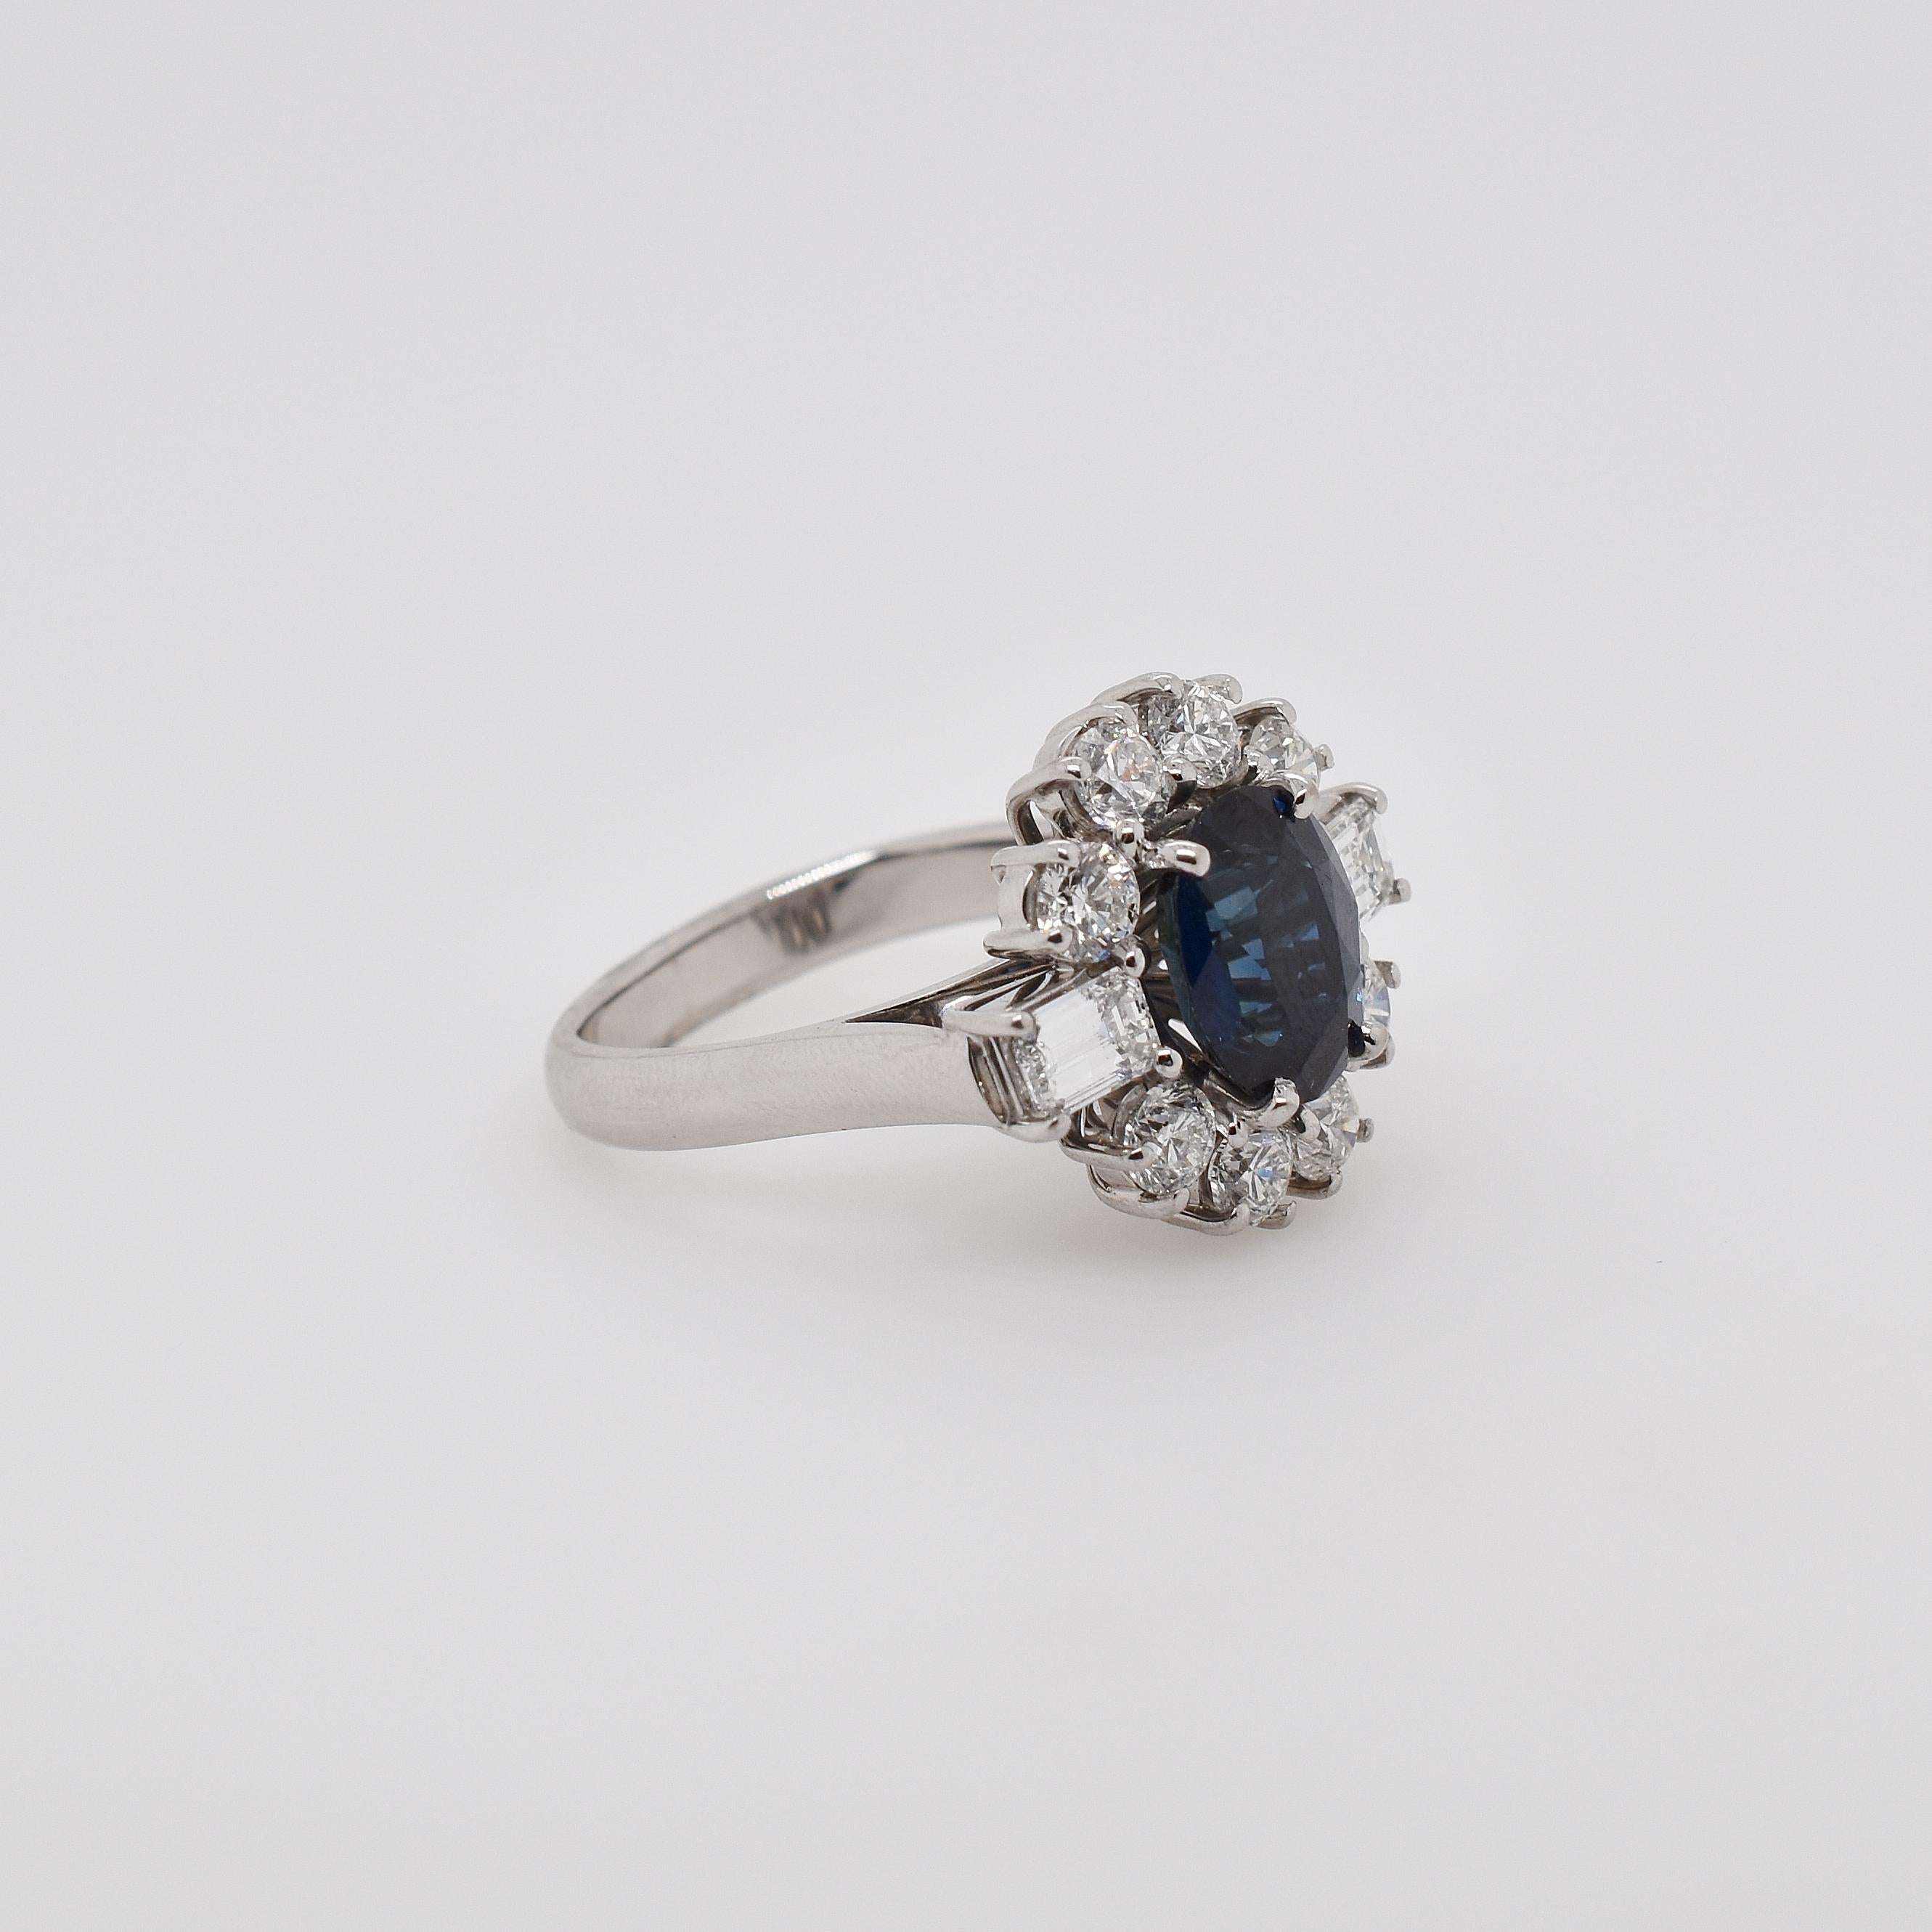 18ct white gold Reddestone creek sapphire and diamond cluster ring. The oval sapphire is 3.88ct, surrounded by round brilliant and emerald cut diamonds. 2 emerald cut totalling 0.67ct and 8 round brilliant totalling 1.45ct. US size 6 1/2 - can be